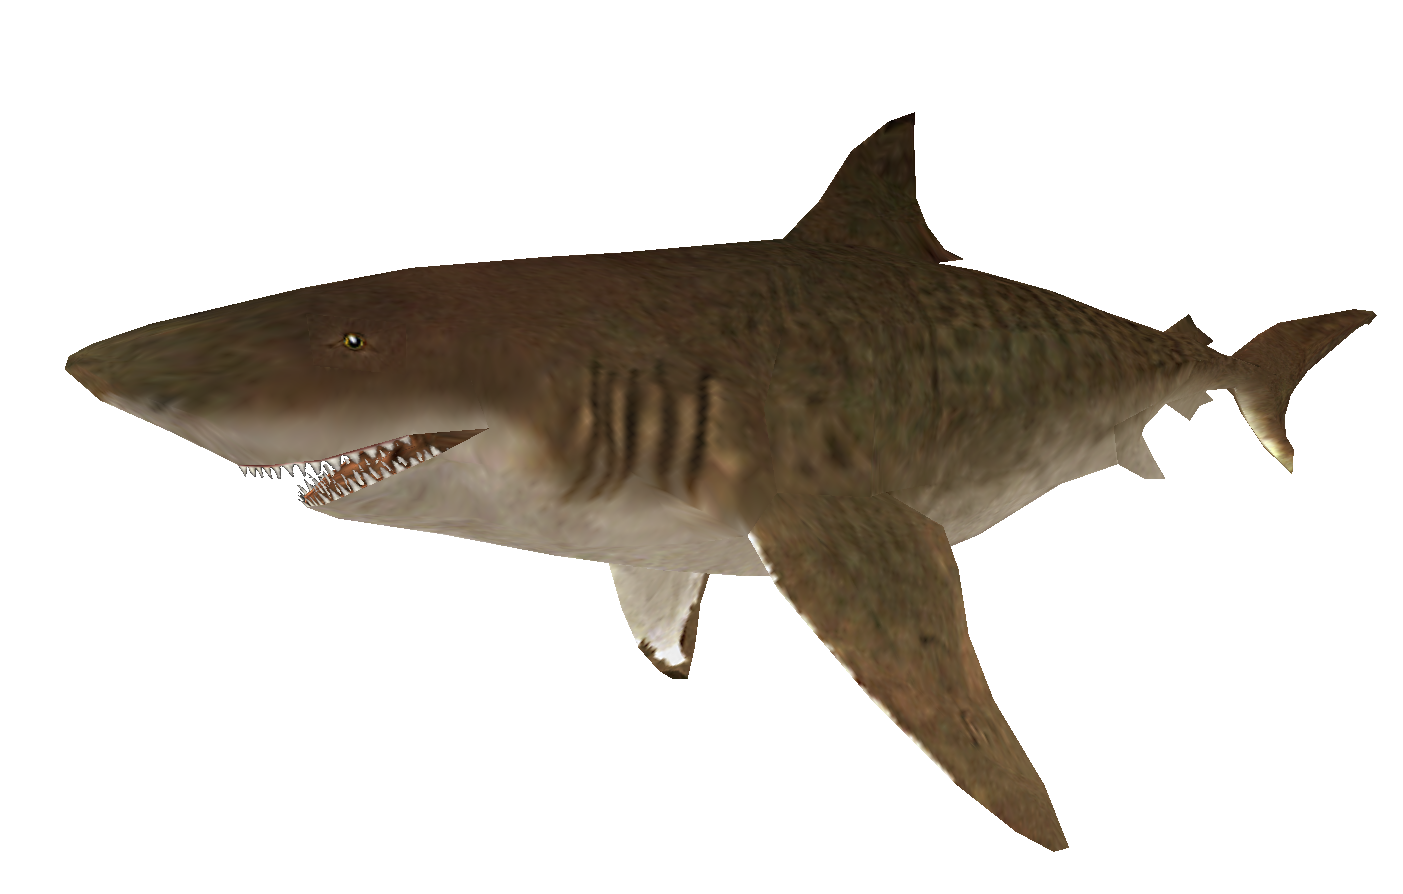 Shark! Hunting the Great White - Carnivores Wiki